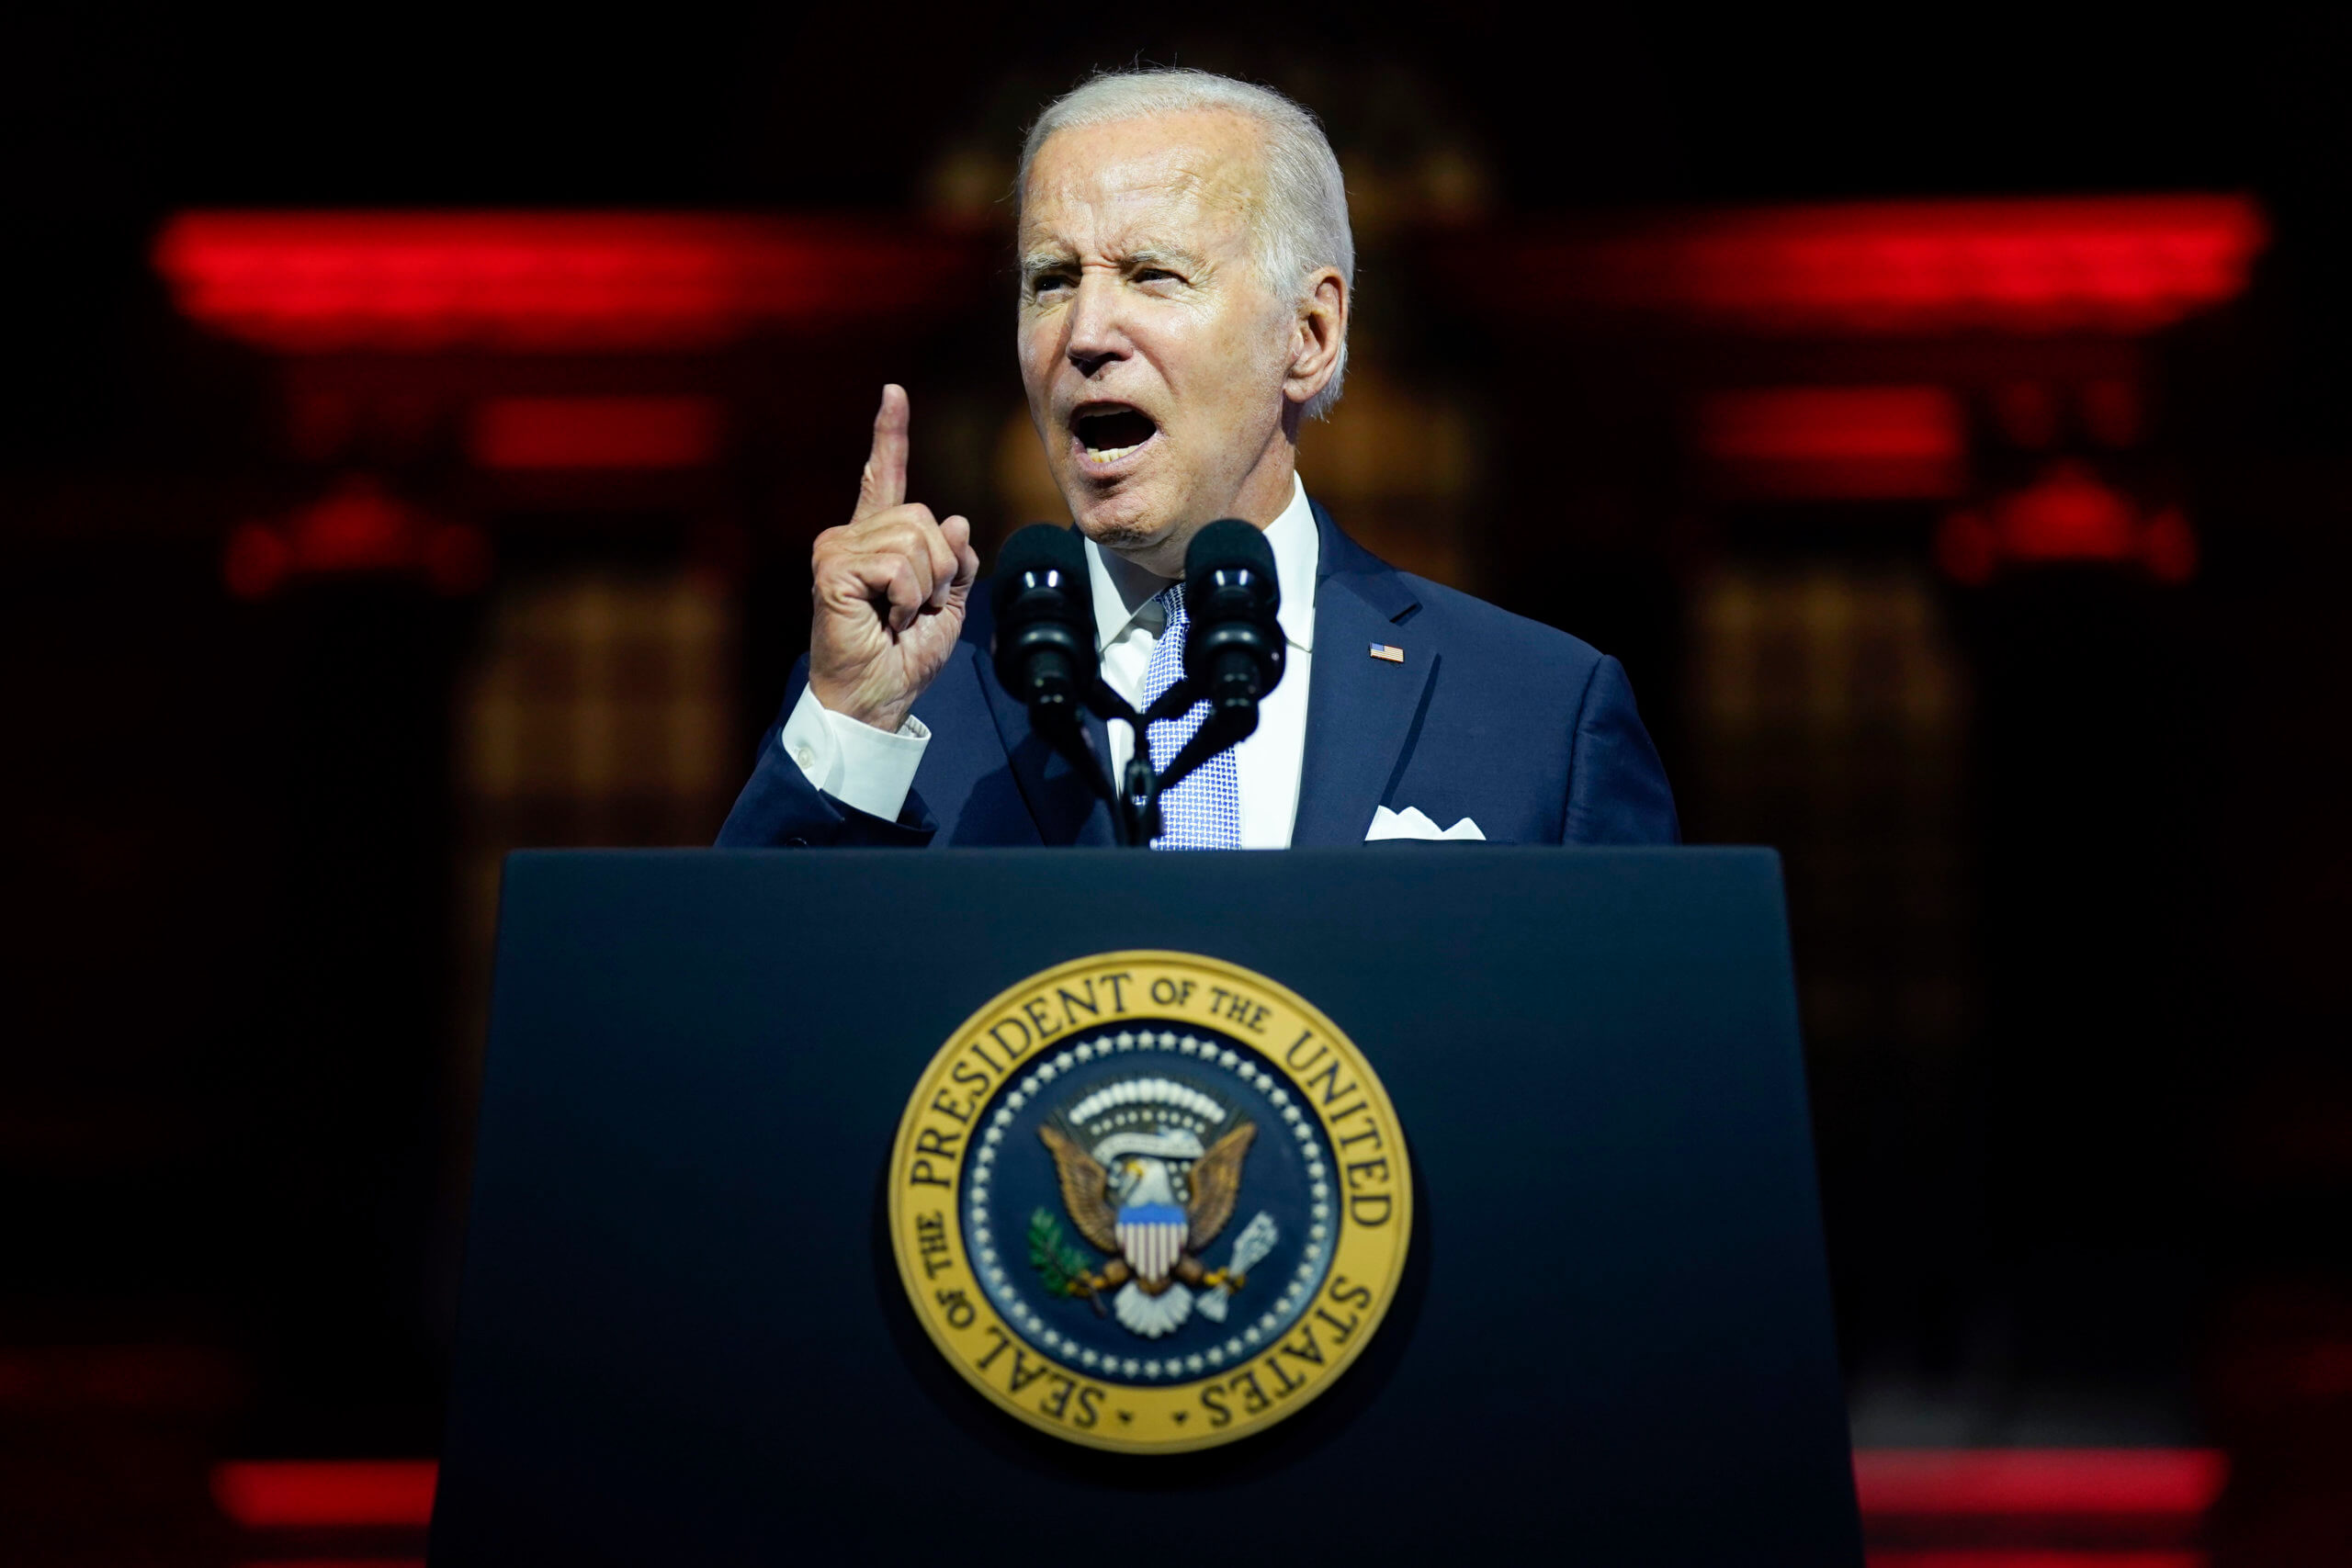 President Biden’s speech from Independence Hall and the “soul” of America